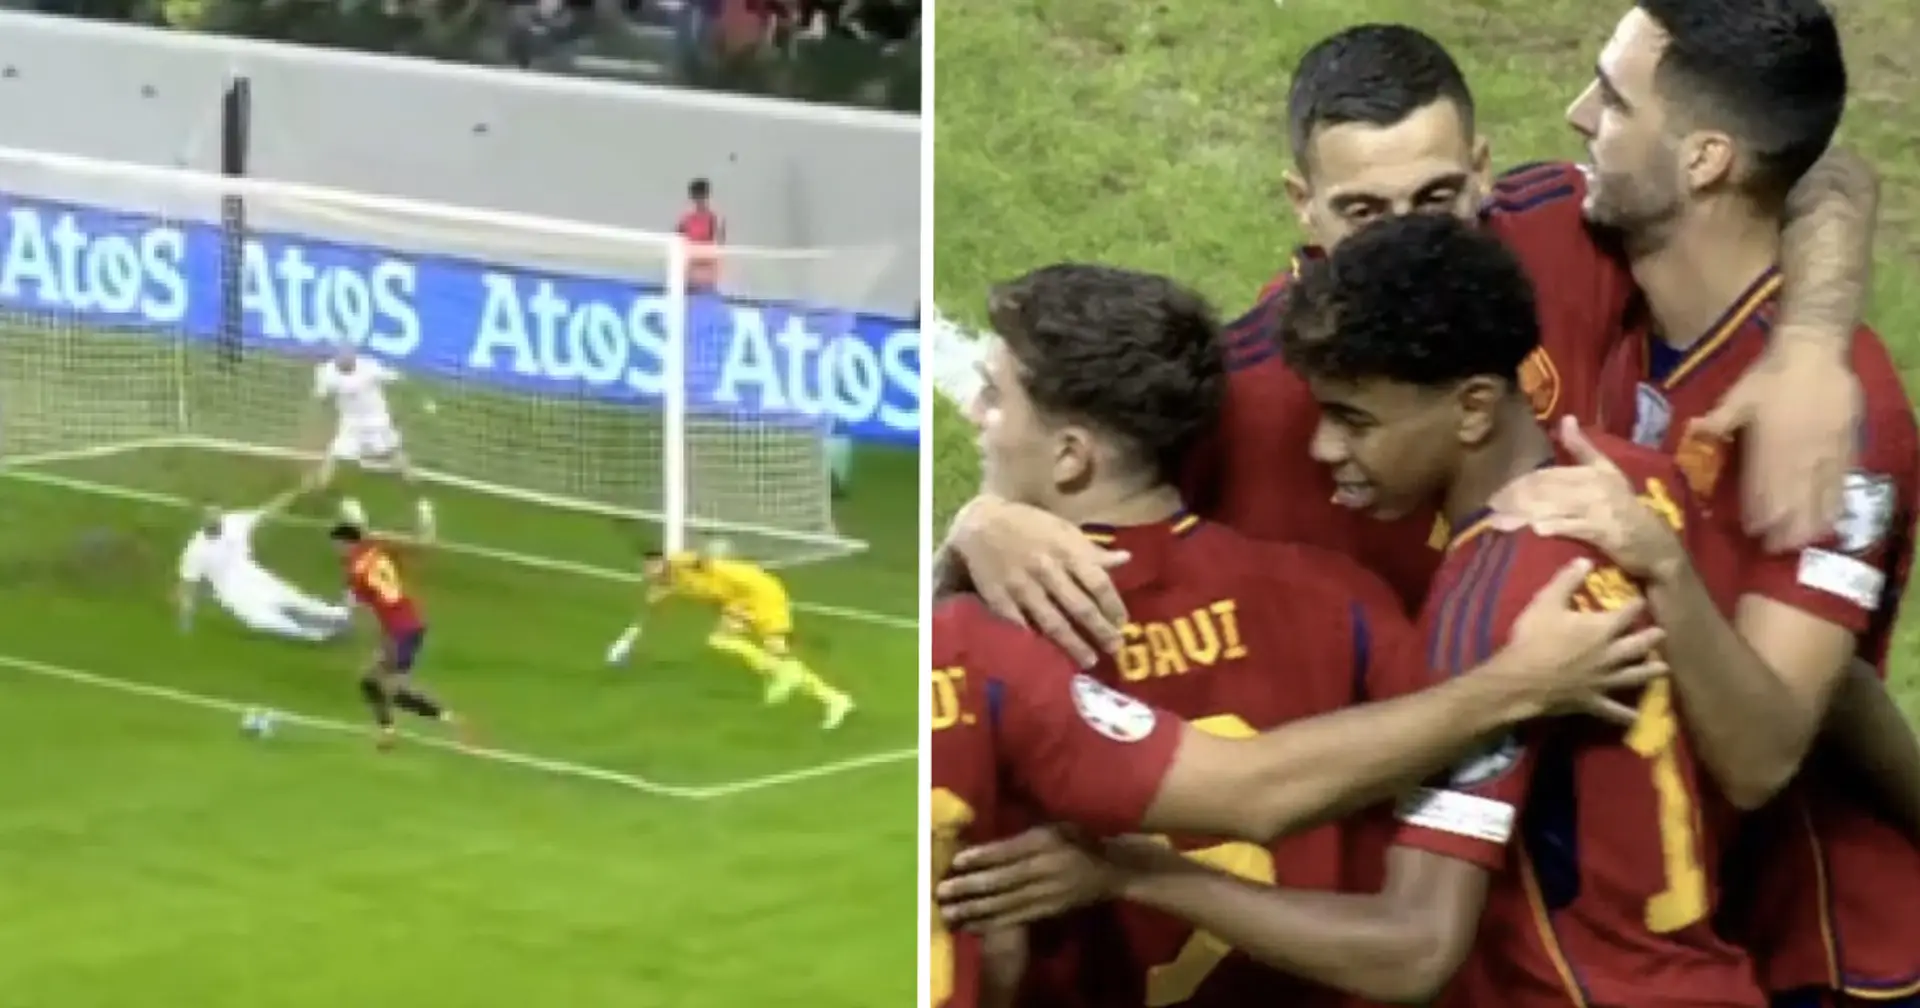 Spotted: Lamine Yamal scores cheeky goal for Spain to equal Busquets 